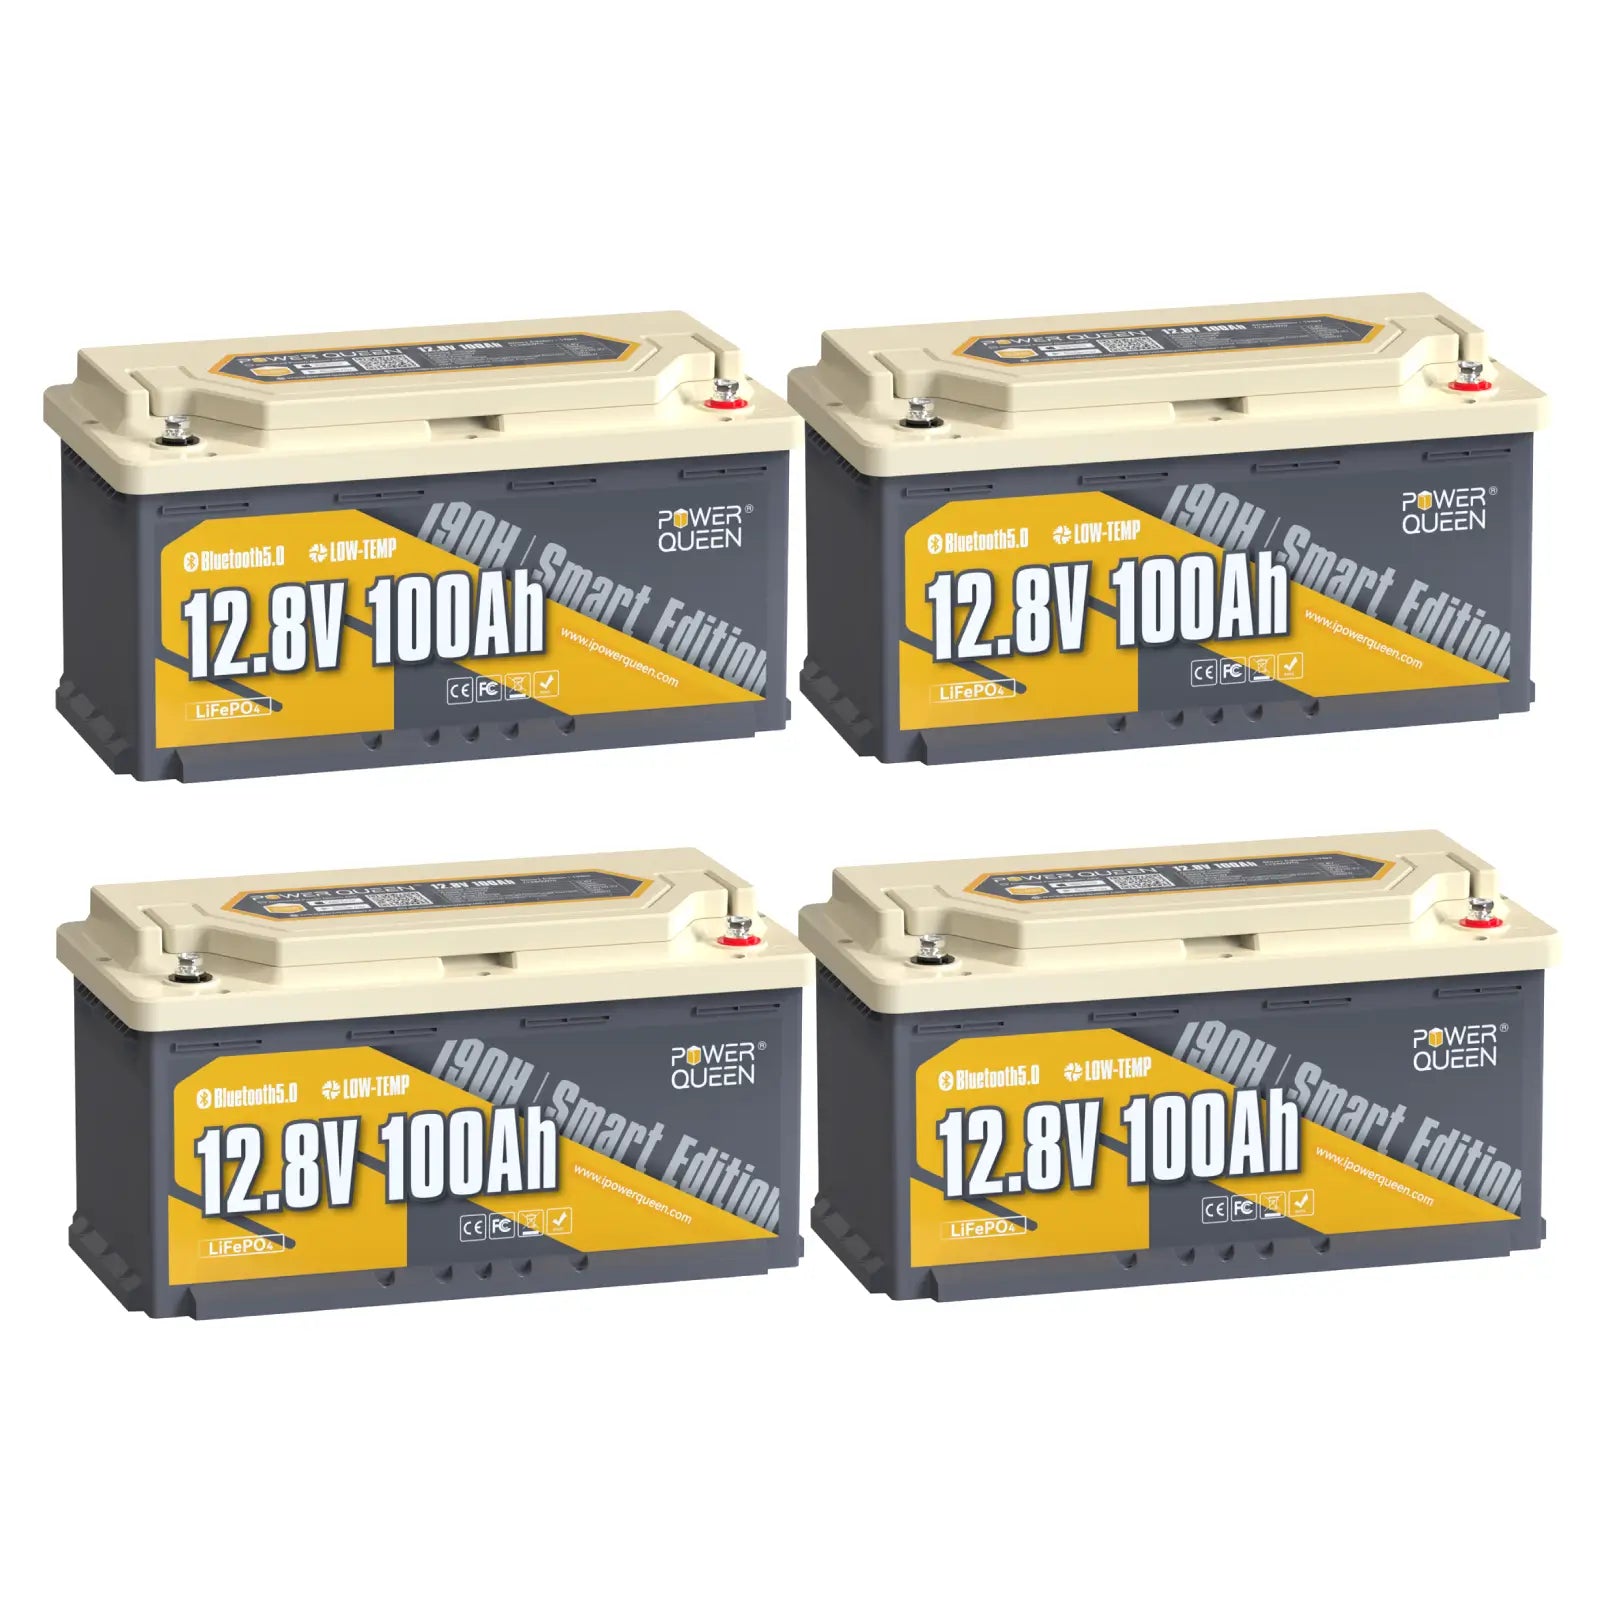 【0% MwSt.】Power Queen LiFePO4 12V 100Ah 190H Smart Wohnmobil Batterie